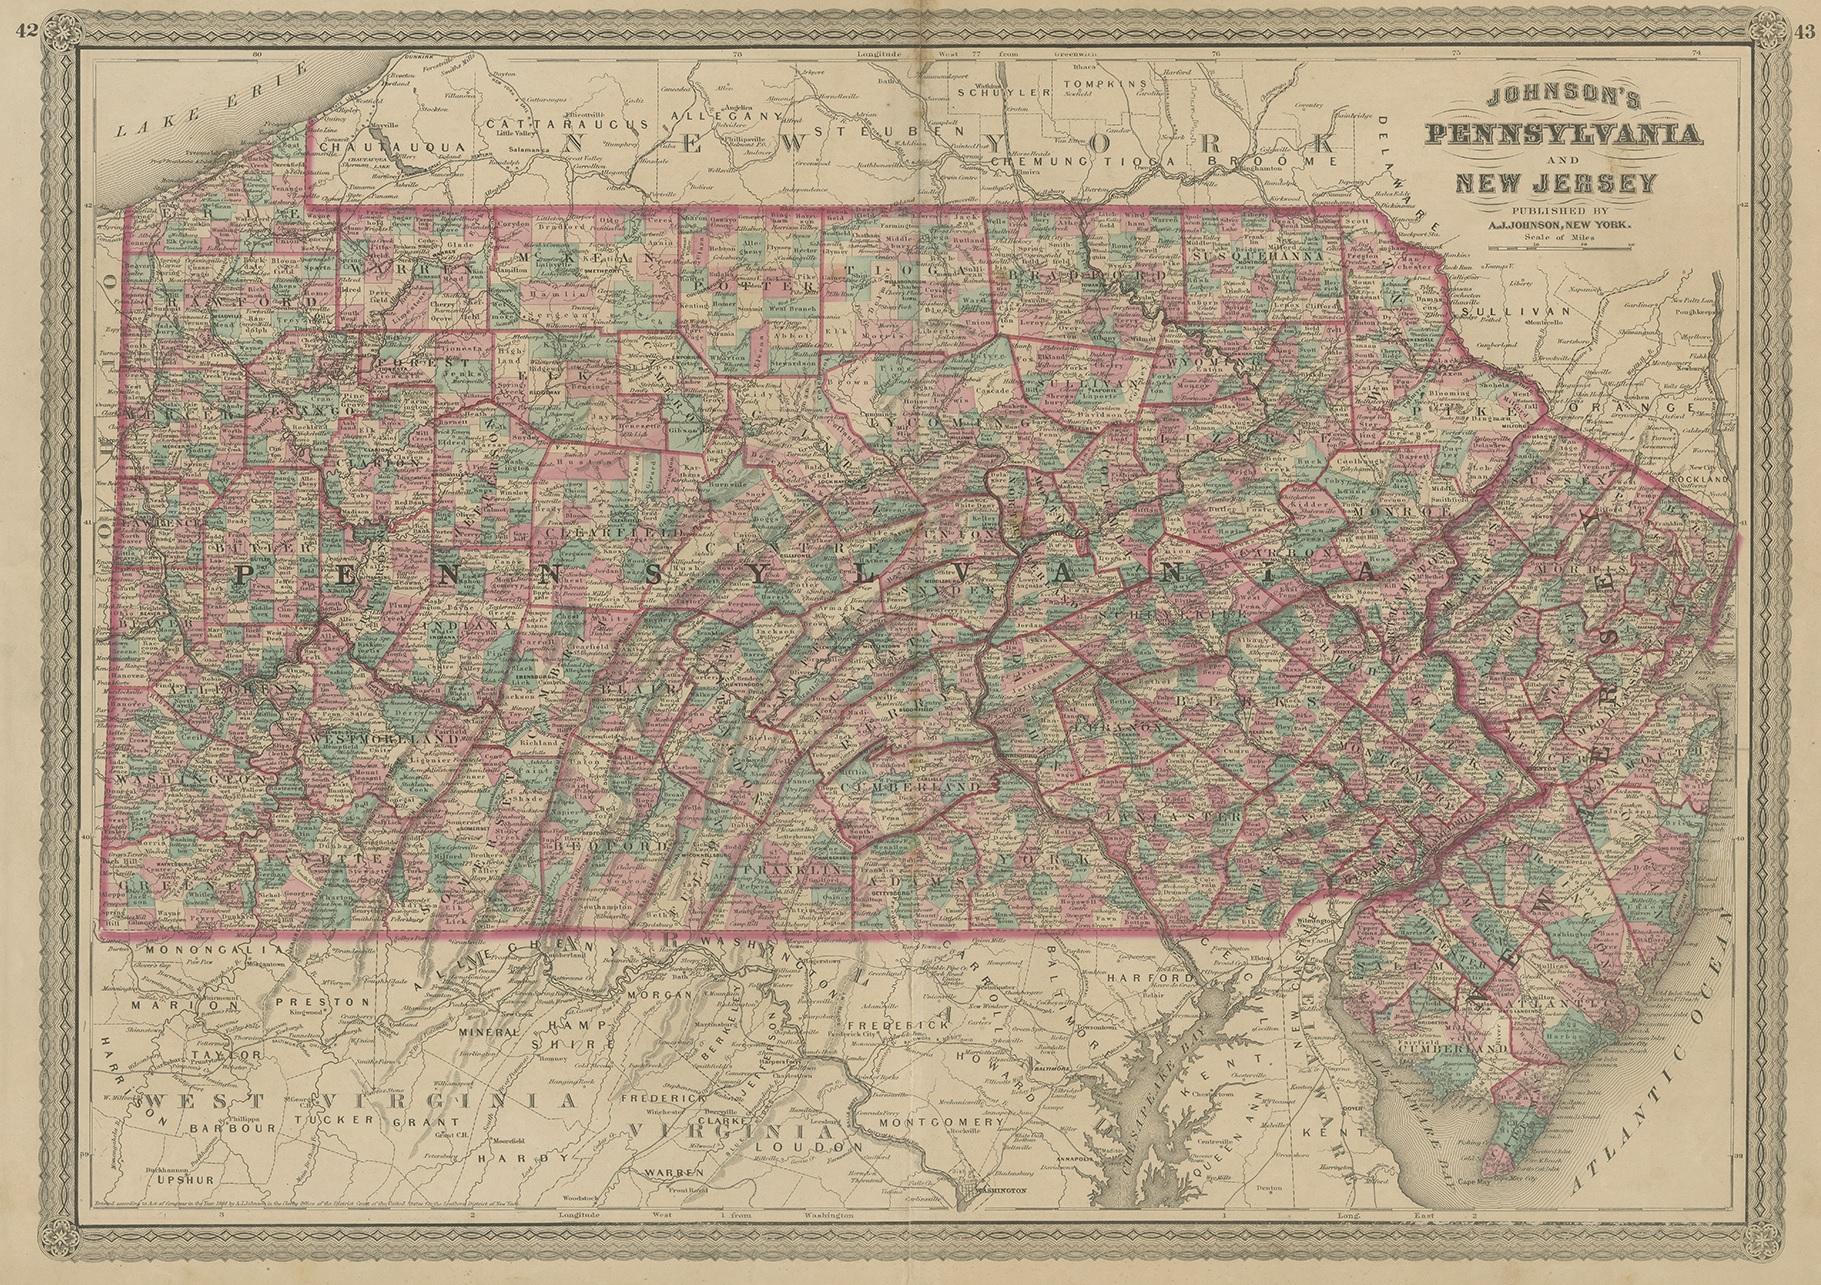 Antique map titled 'Johnson's Pennsylvania and New Jersey'. Original map showing Pennsylvania and New Jersey. This map originates from 'Johnson's New Illustrated Family Atlas of the World' by A.J. Johnson. Published 1872.